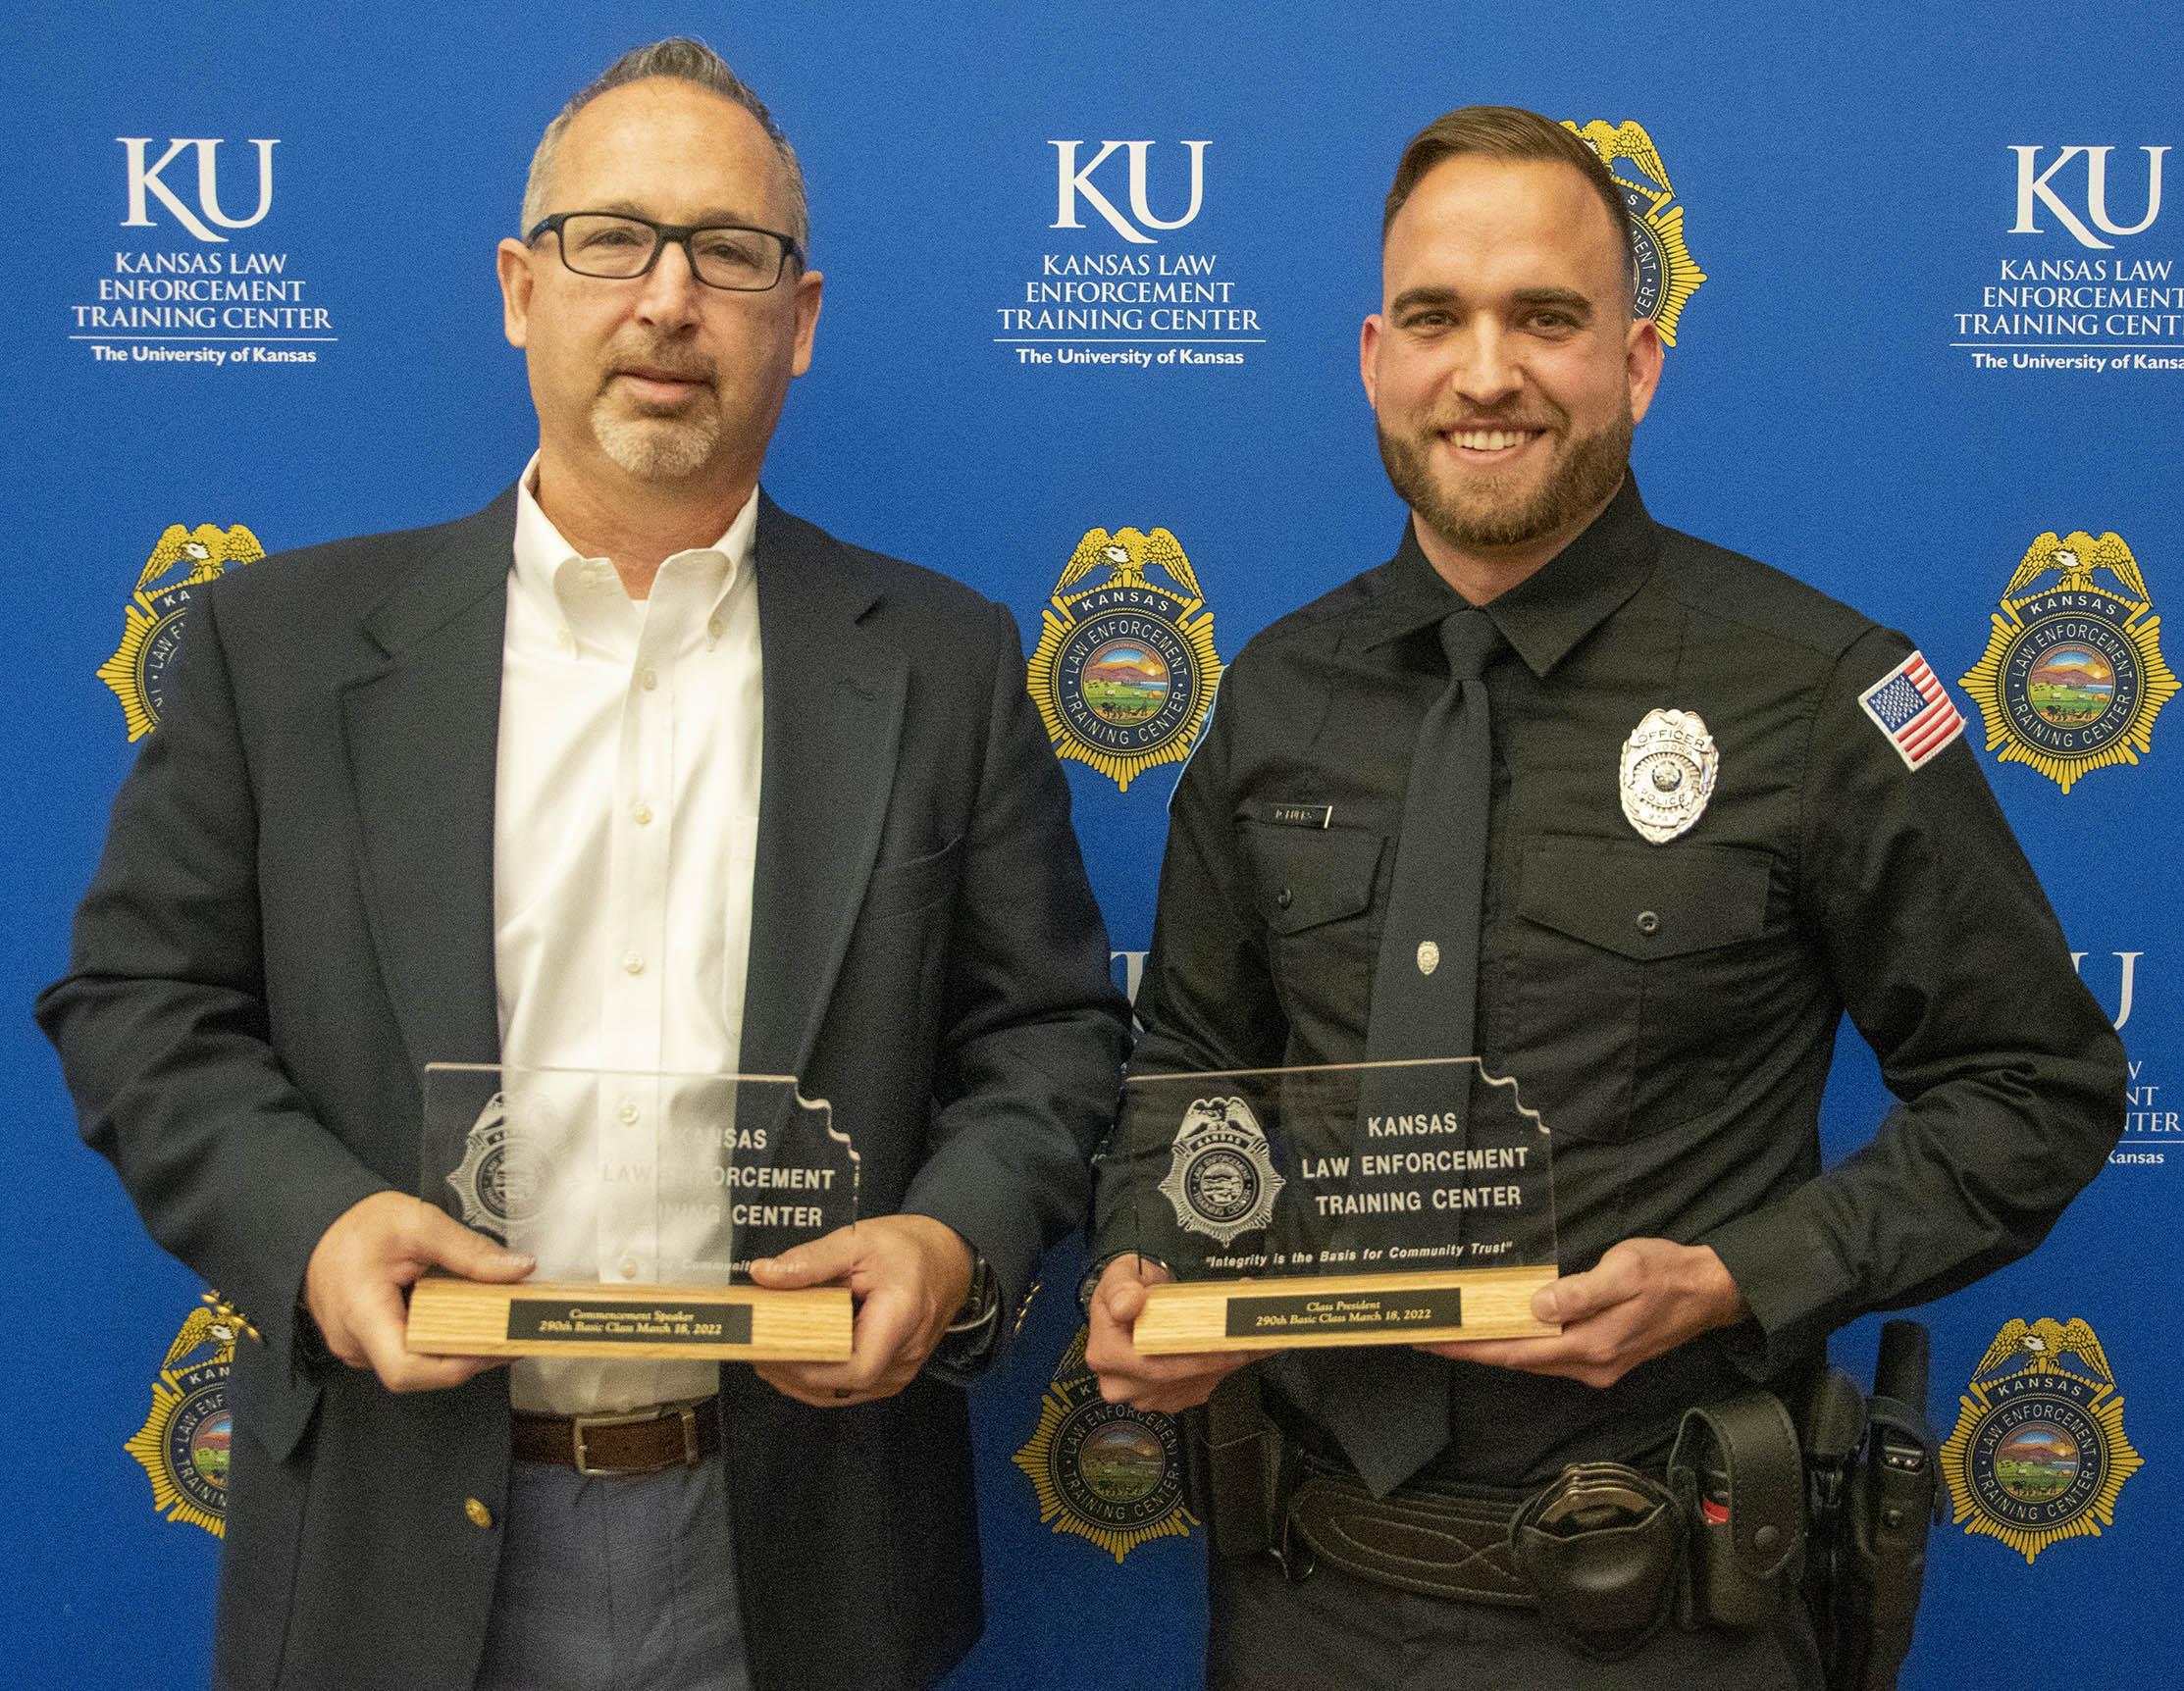 "Wes Lovett, Chief of Police for the Eudora Police Department, stands with his newest graduate and class president for the 290 basic training class, Officer Daniel Fulks"